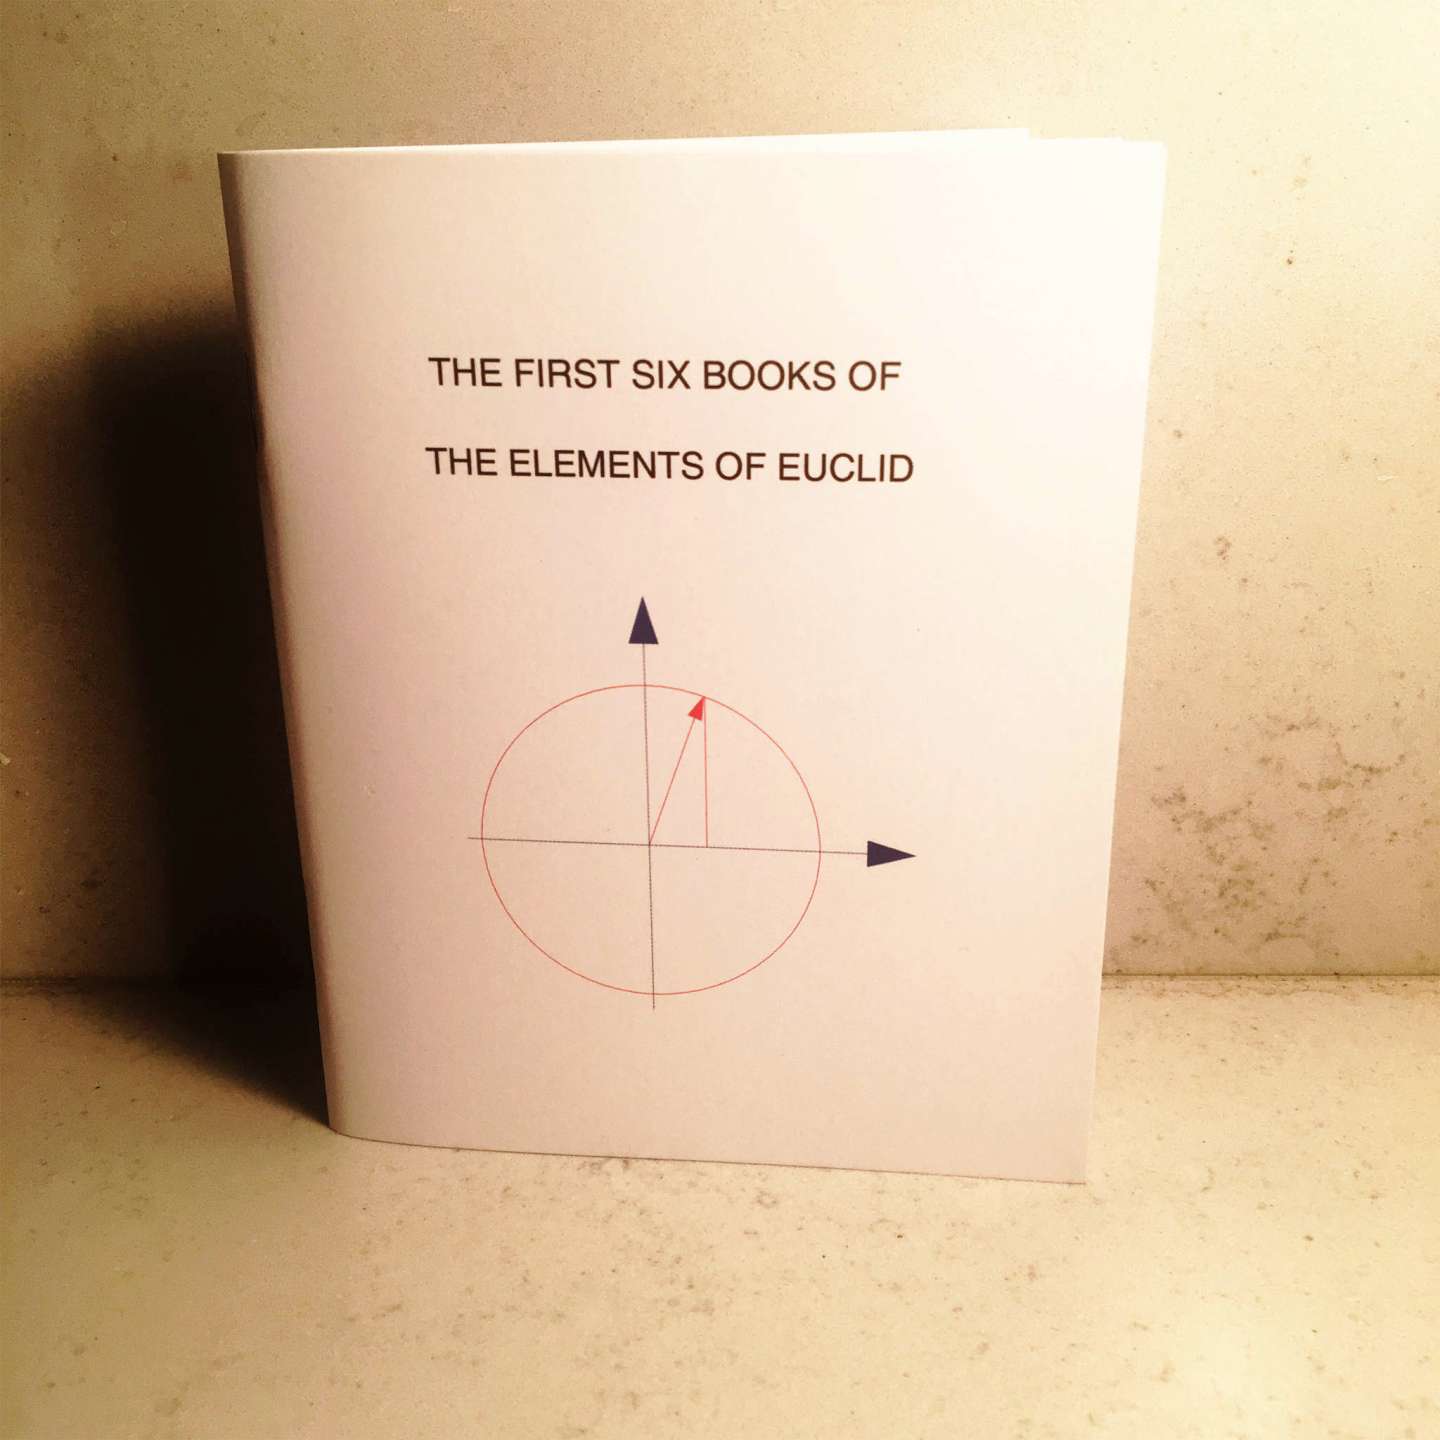 THE FIRST SIX BOOKS OF THE ELEMENTS OF EUCLID